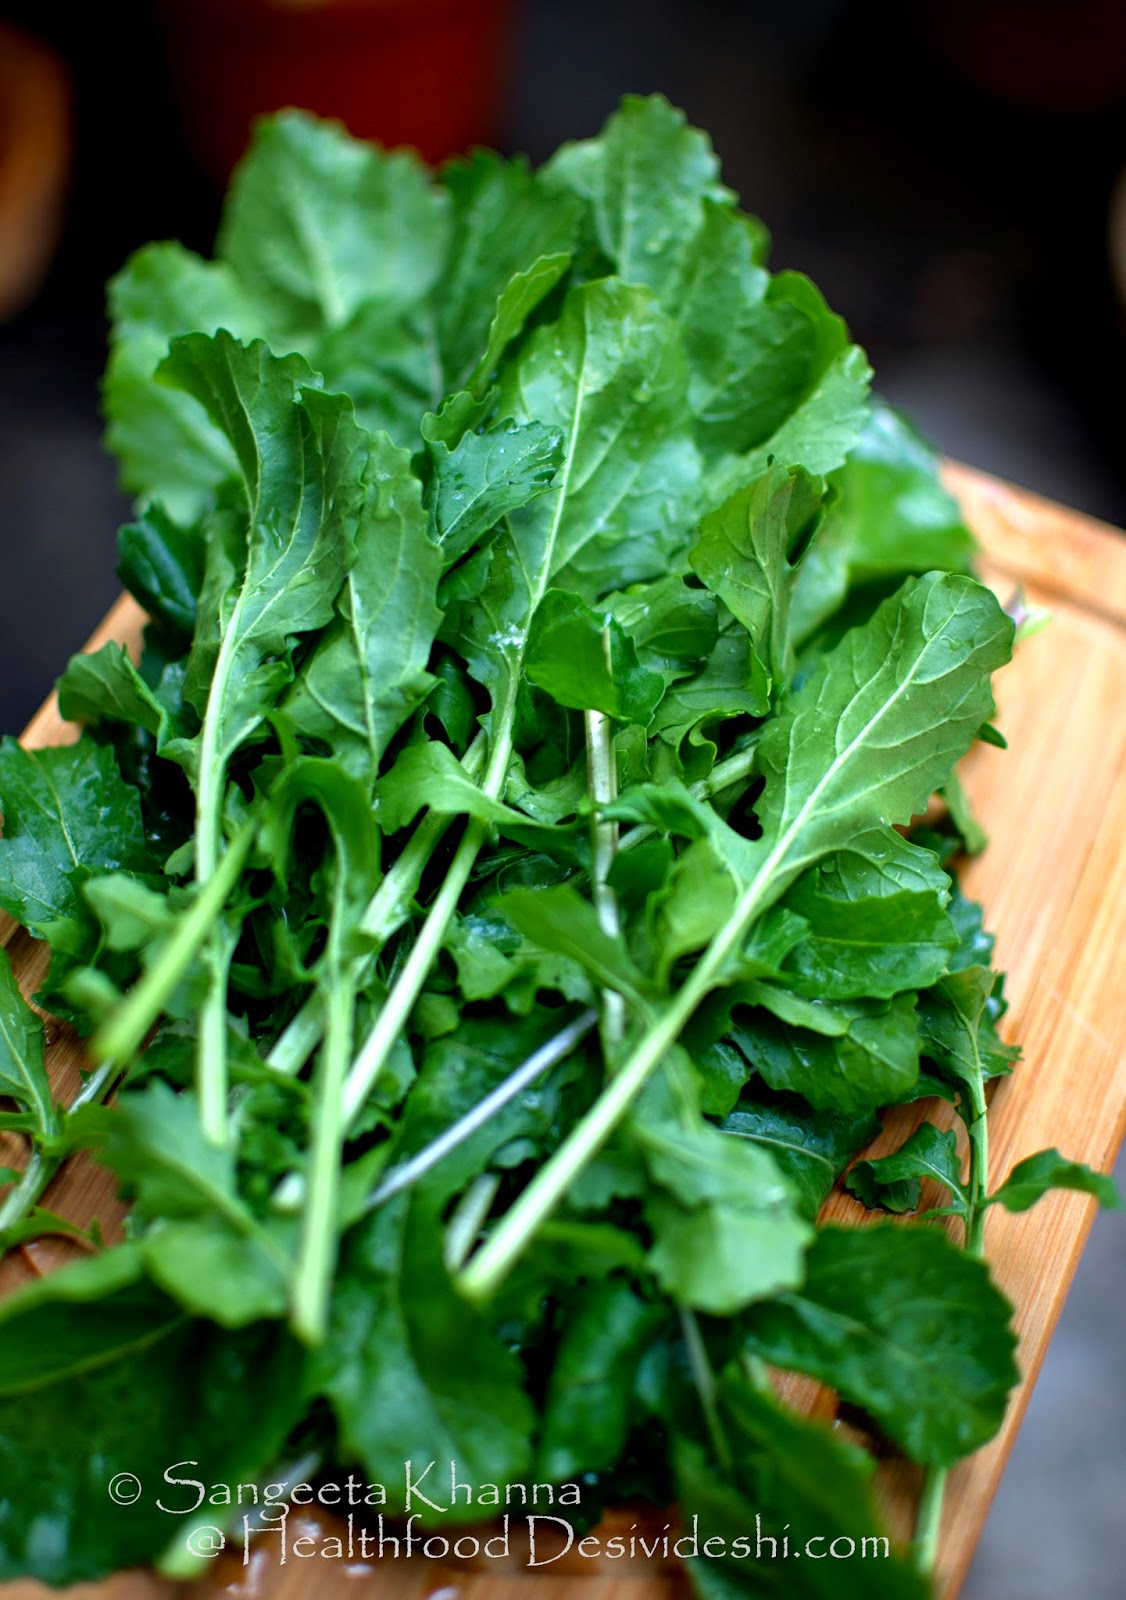 Are arugula and rucola different? Know more about the rocket